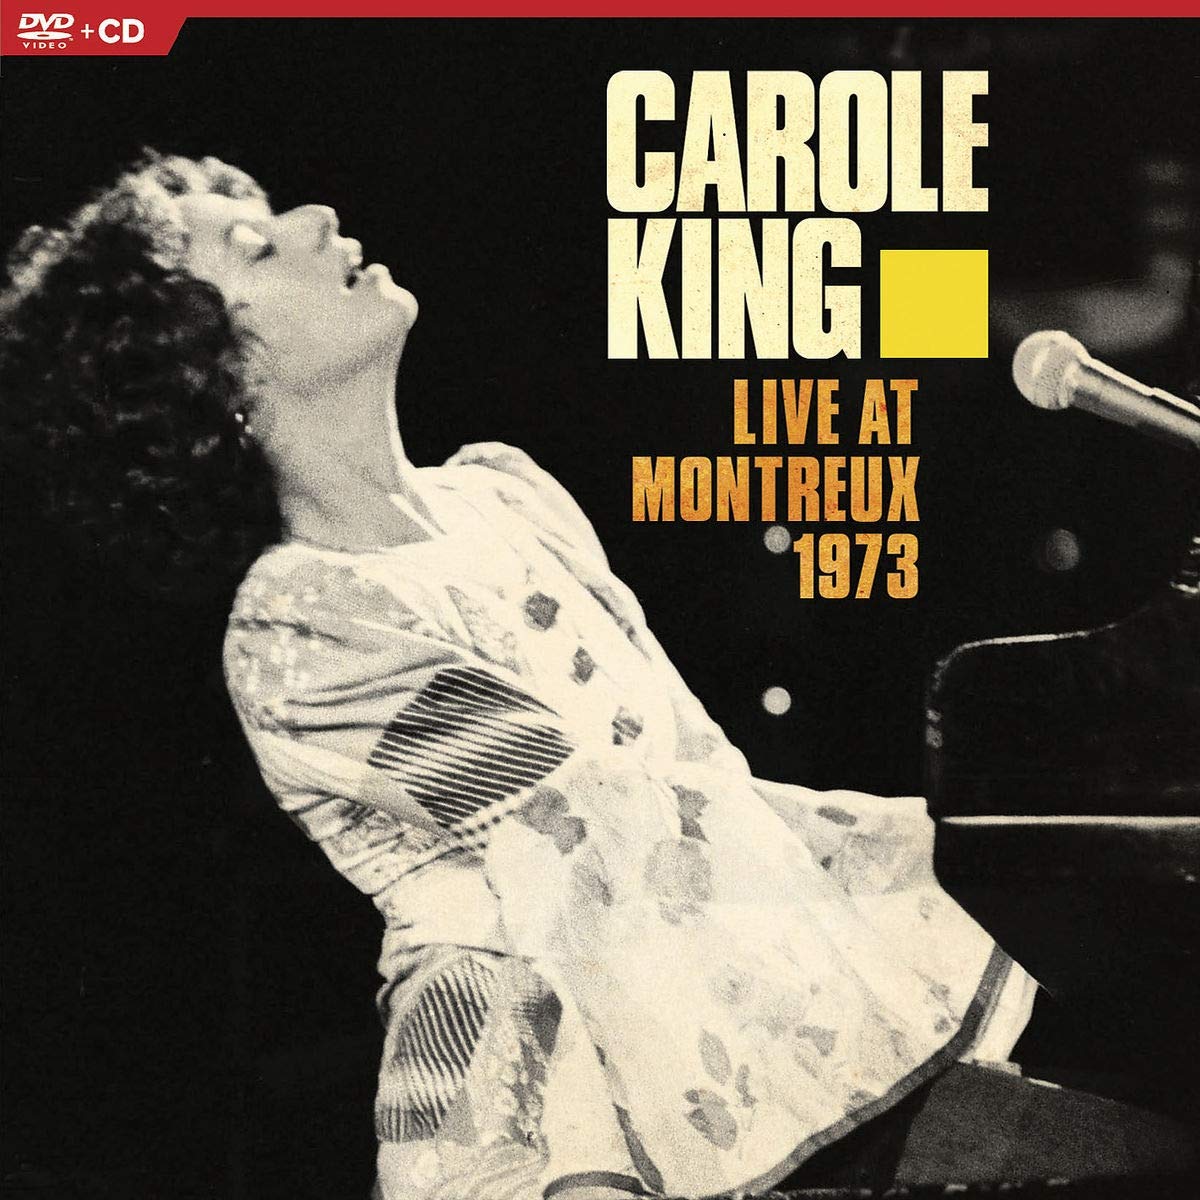 LIVE AT MONTREUX 1973 CD+DVD